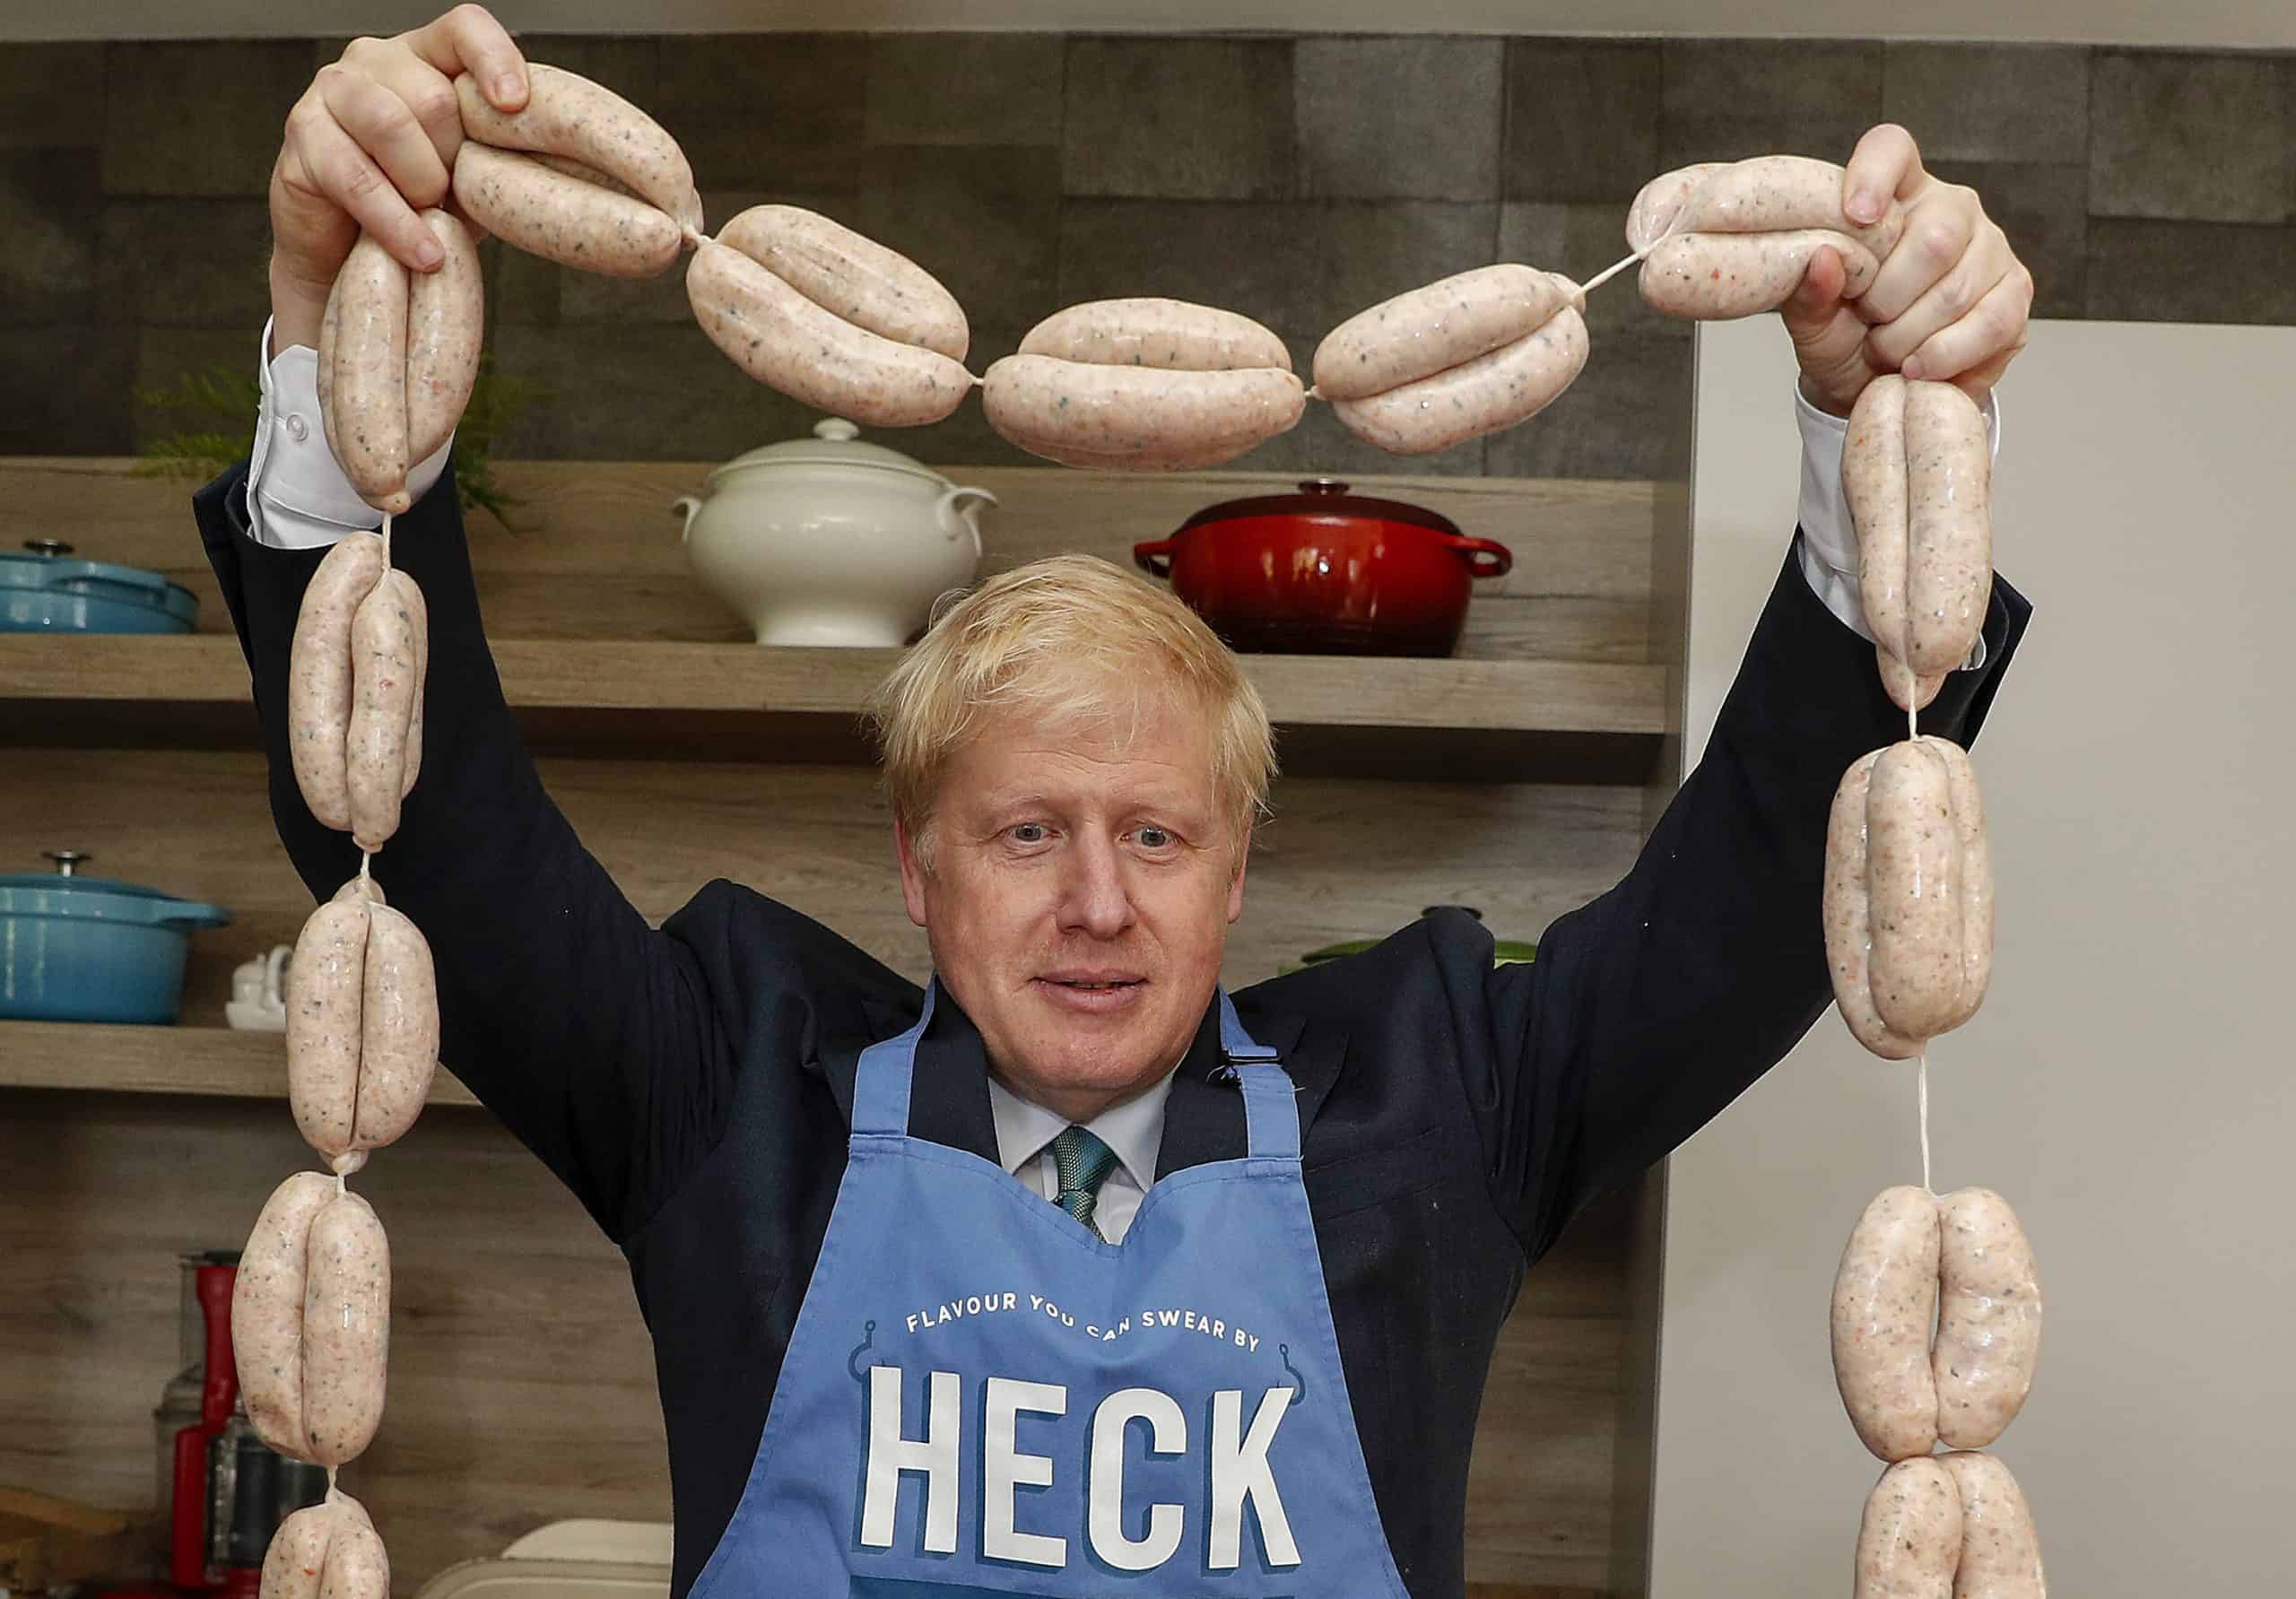 ‘The Battle of the Bangers’ looms large… and Boris has history